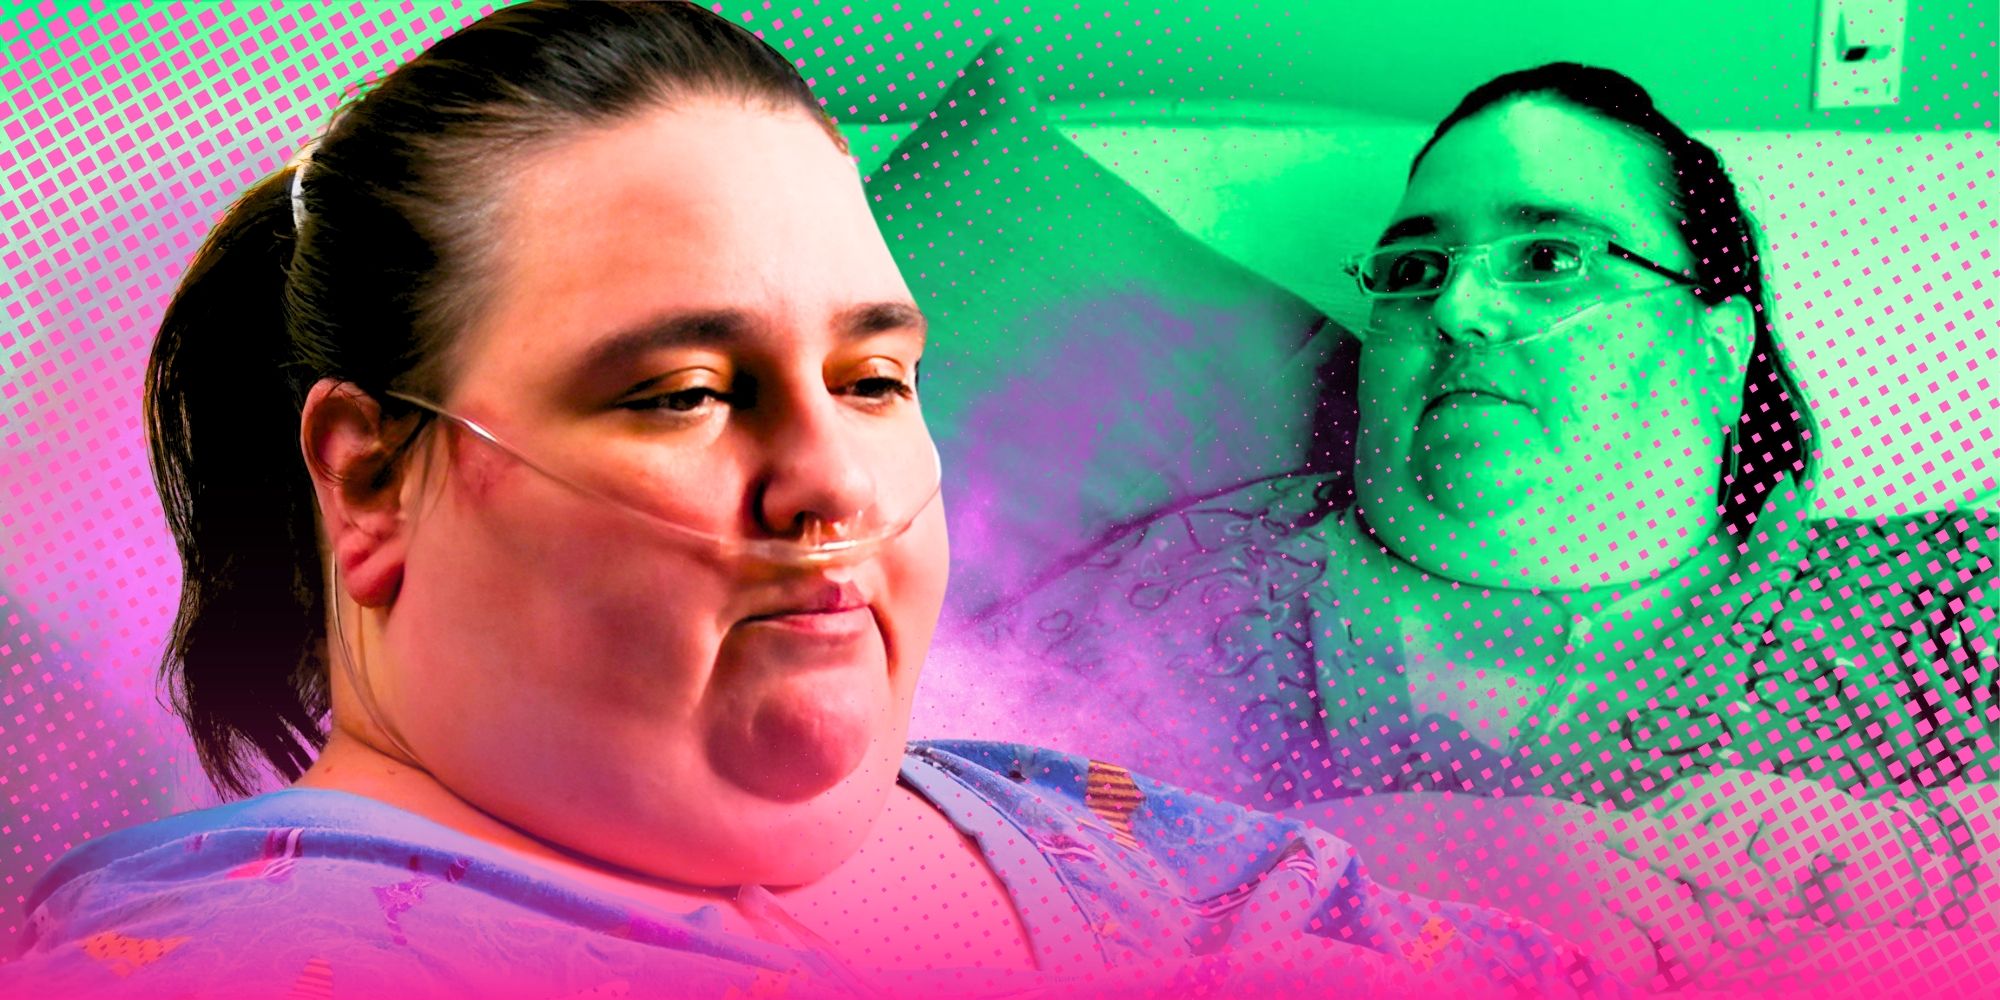 Penny Saeger from My 600-Lb Life Season 2 montage pink and green colors